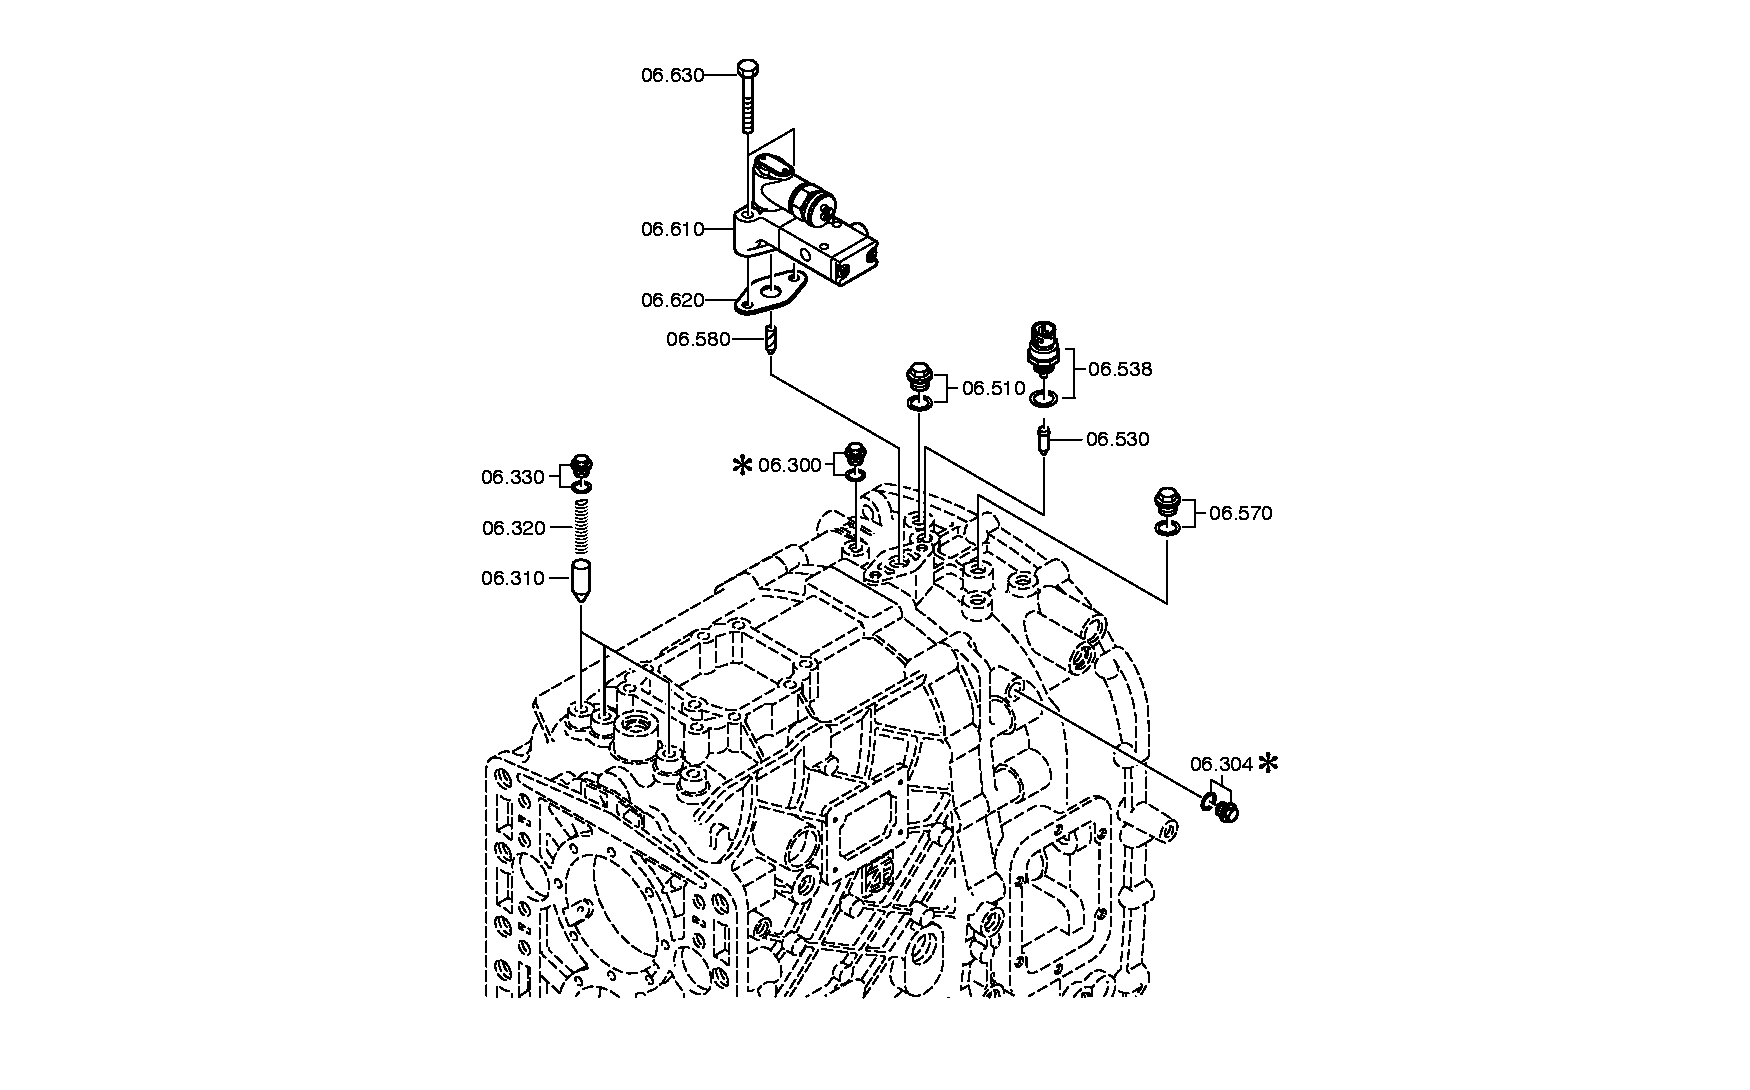 drawing for ASIA MOTORS CO. INC. 409-01-0029 - PIN (figure 3)